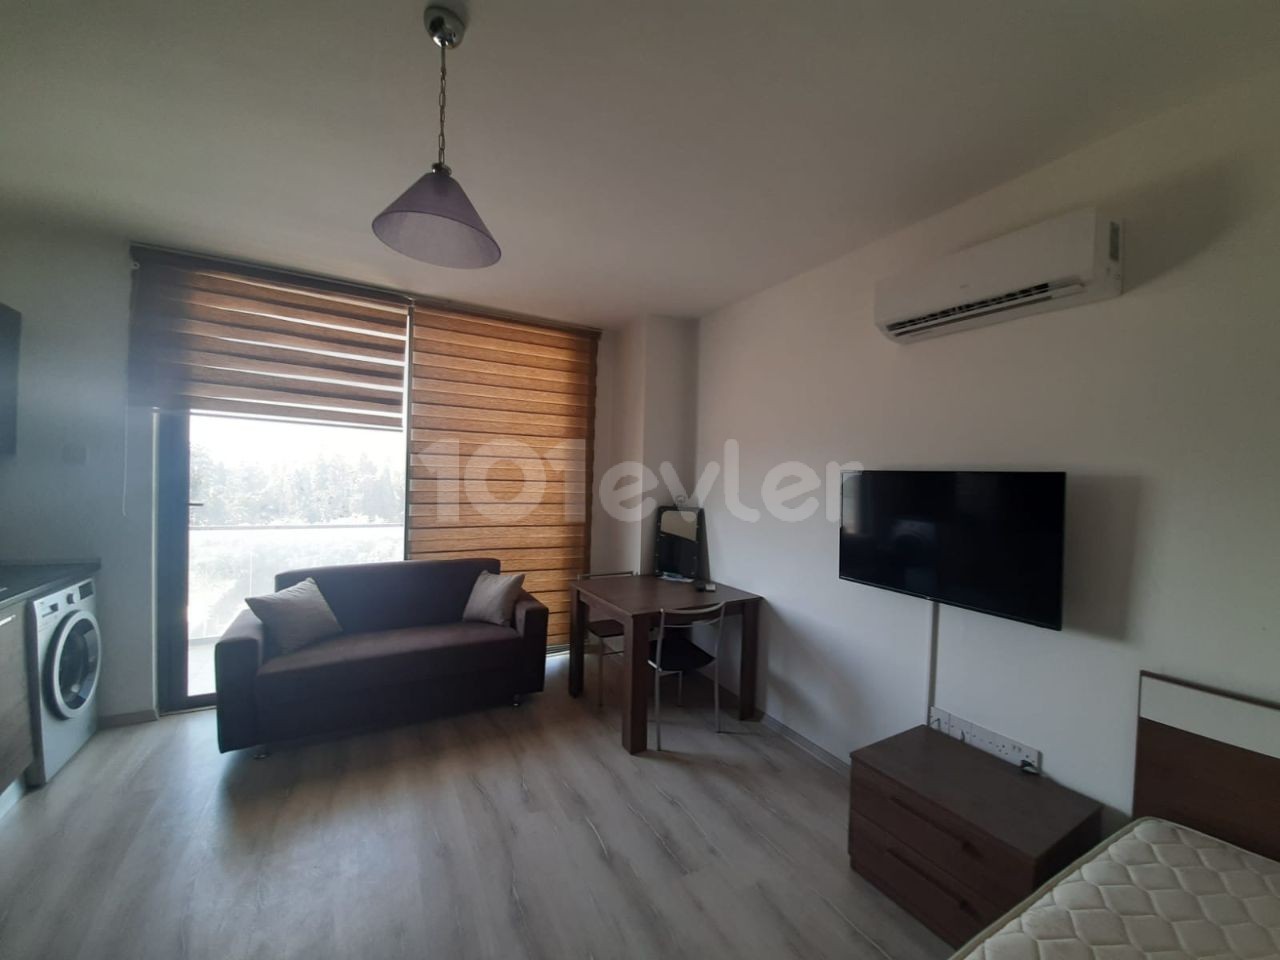 FAMAGUSTA UPTO LLOVN 1+0 STUDIO READY FOR RENT 4.FLOOR PER MONTH 300$ 6 MONTHS PAYMENT DEPOSIT AND COMMISSION APARTMENT CHARGE PER MONTH 29① ** 